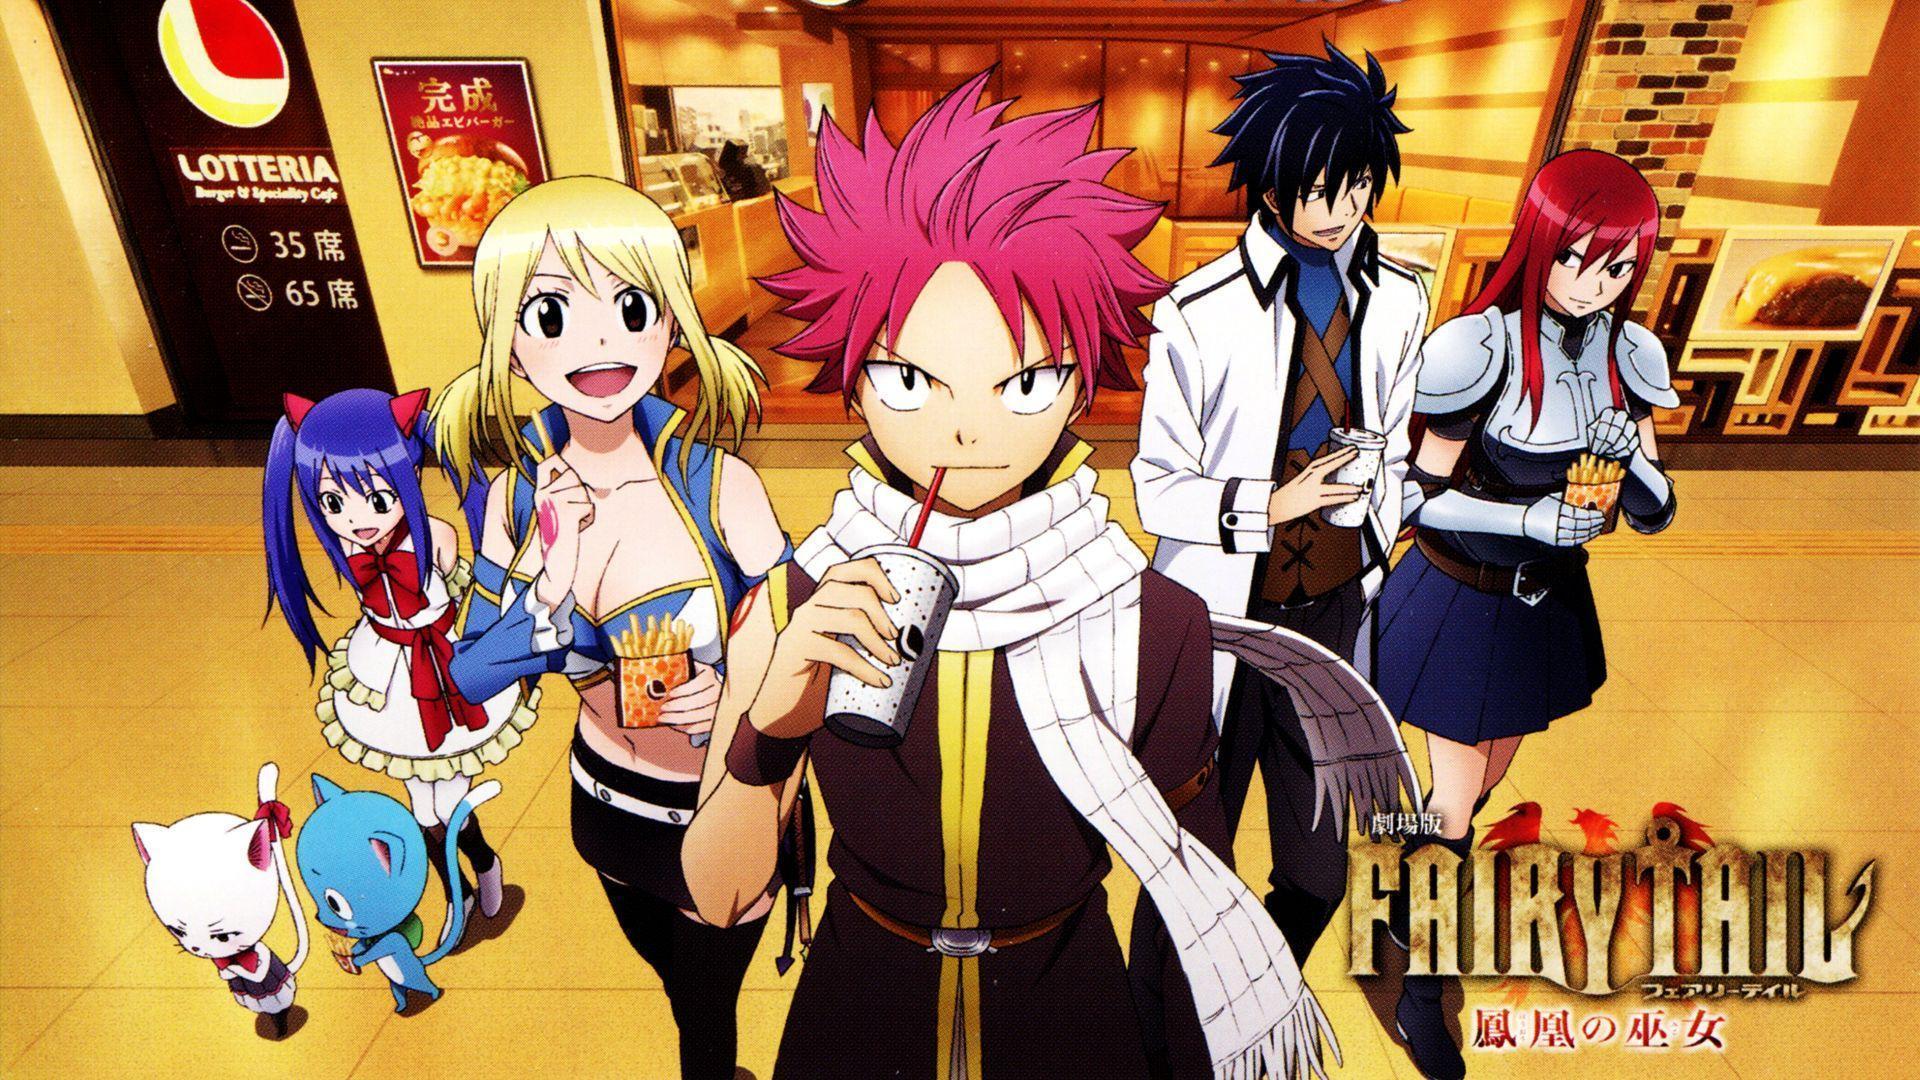 fairy tail anime hd. 1920x1080 1080p wallpaper and compatible